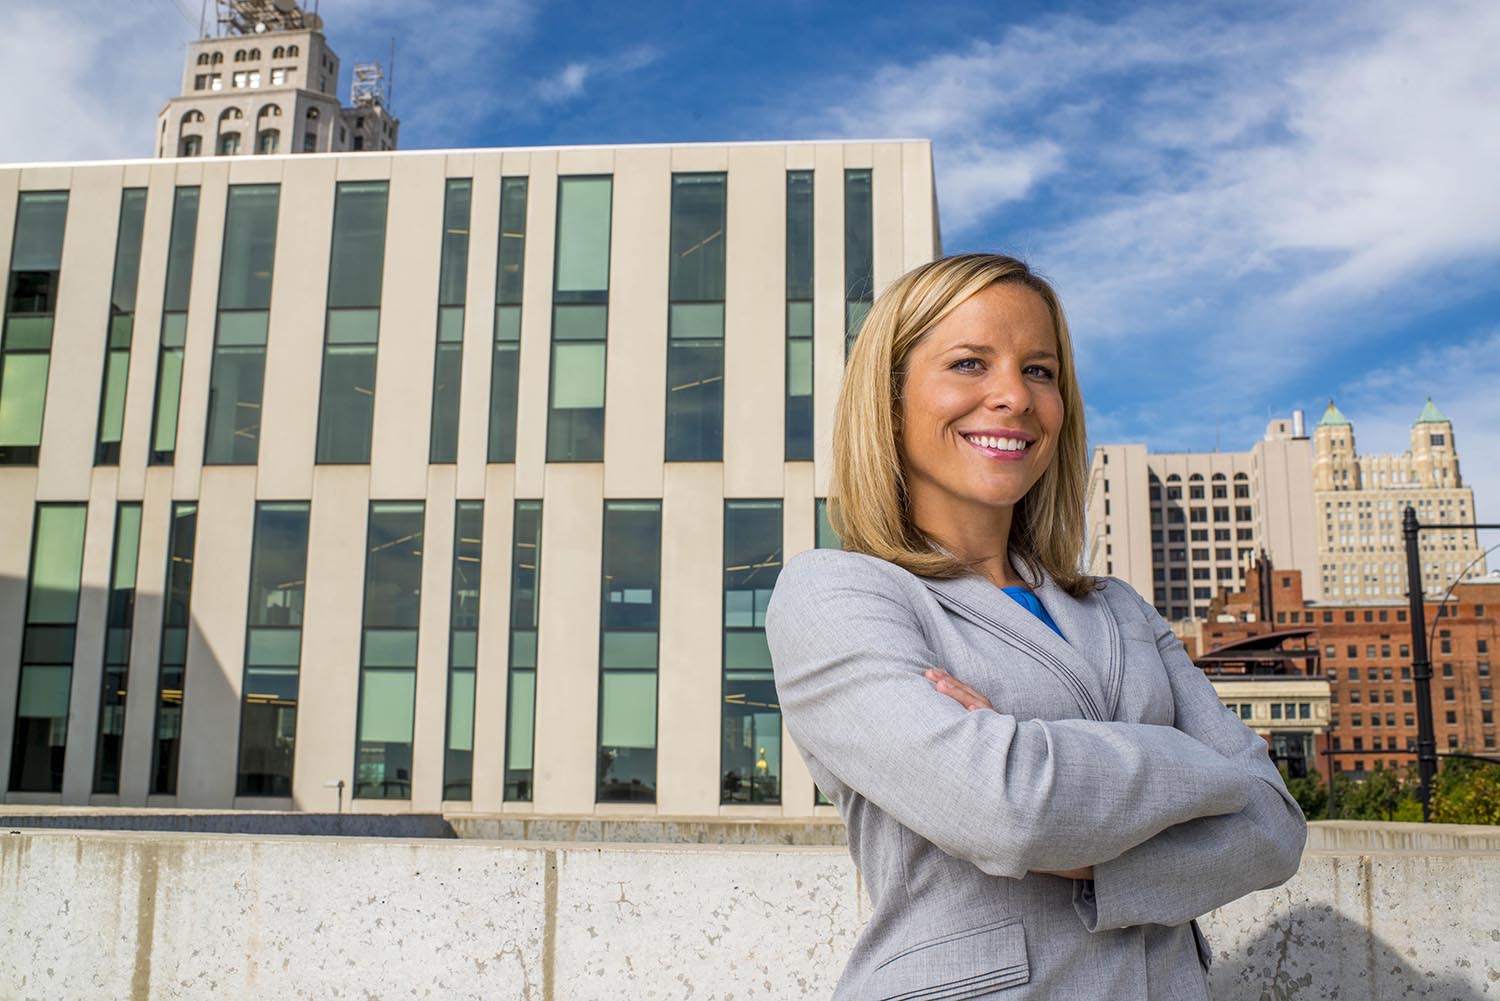 Kansas City business woman posing with arms crossed and smiling in front of office building